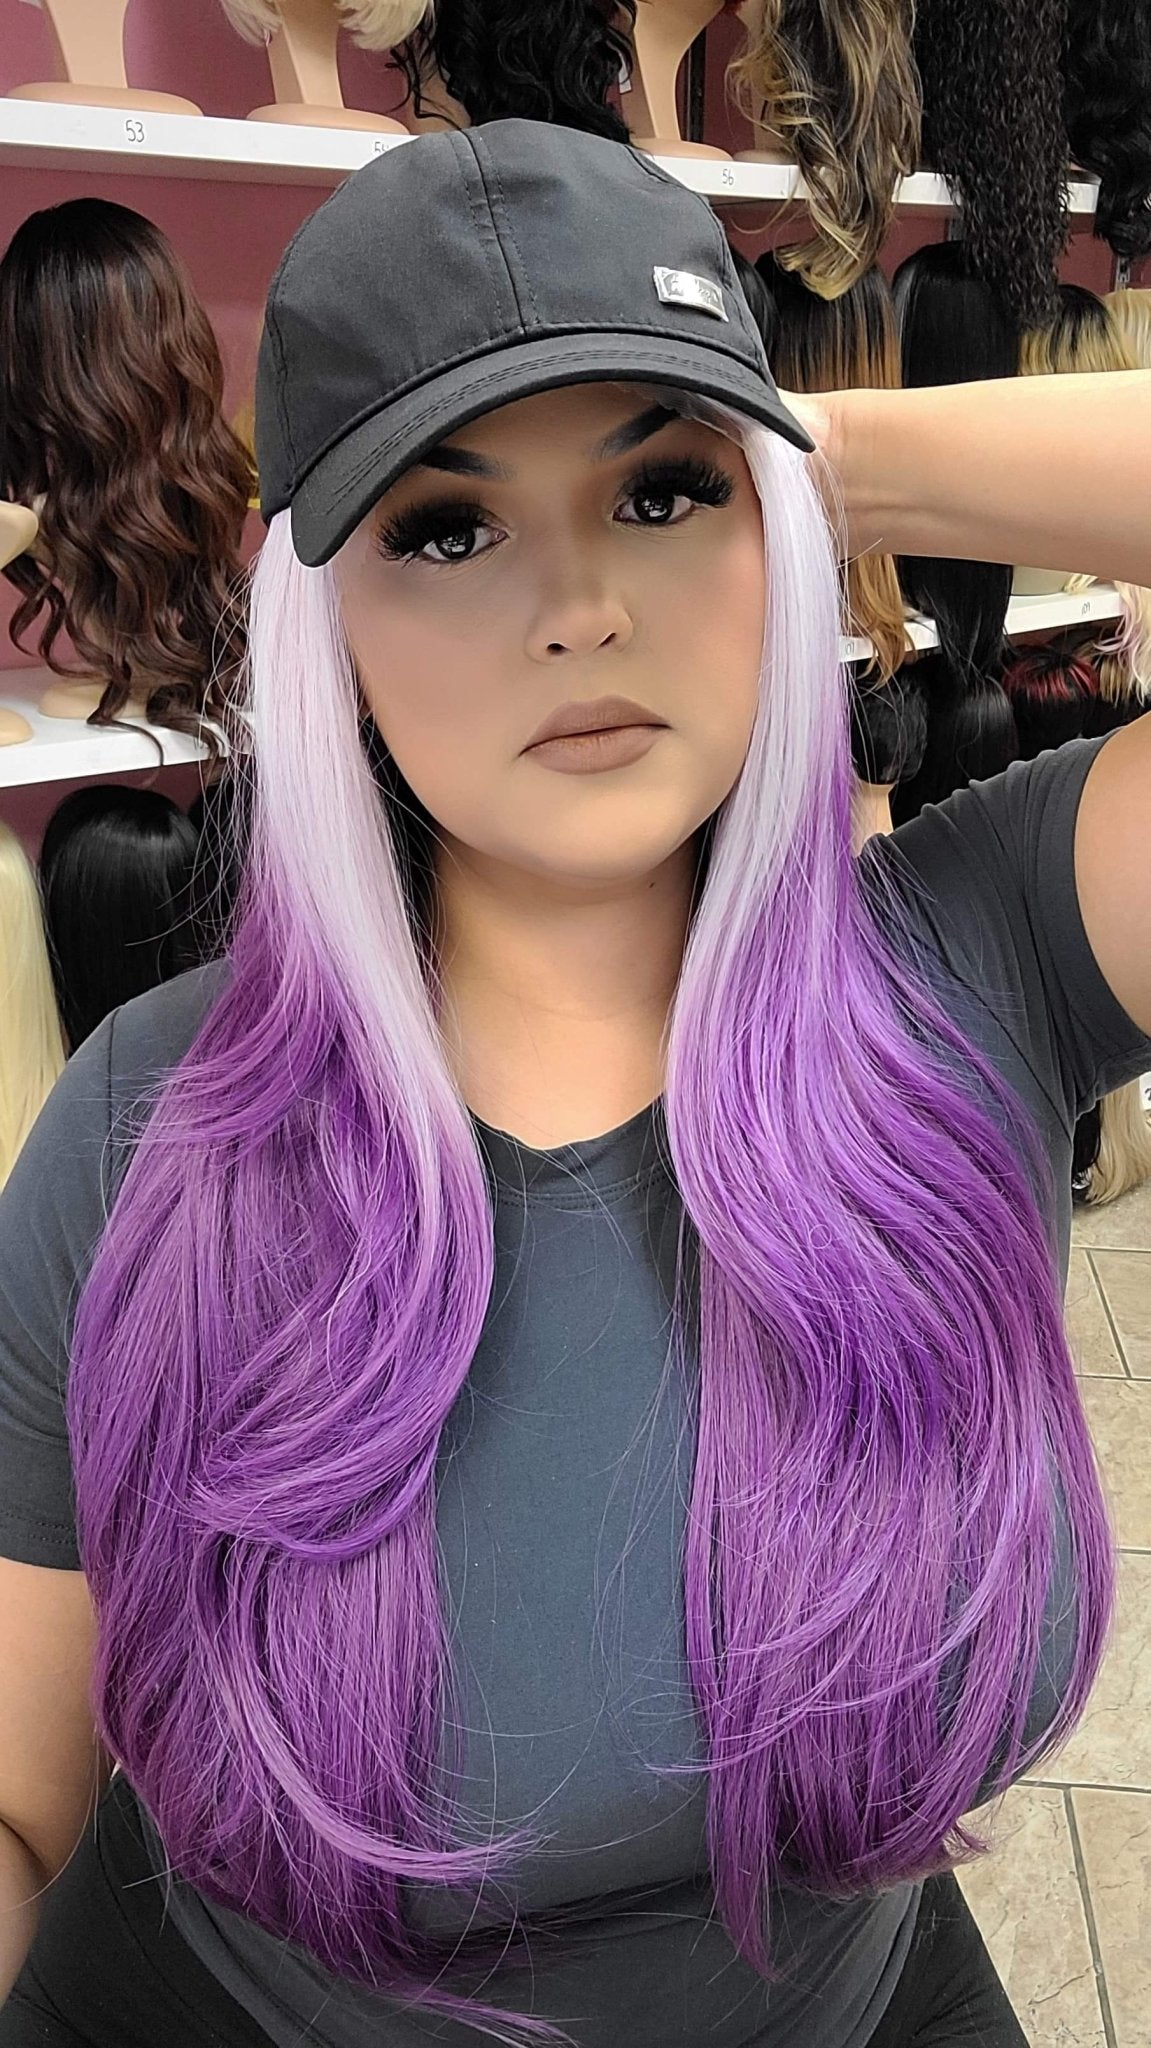 376 Chloe - Middle Part Lace Front Wig - LILAC/PURP - DaizyKat Cosmetics 376 Chloe - Middle Part Lace Front Wig - LILAC/PURP DaizyKat Cosmetics Wigs